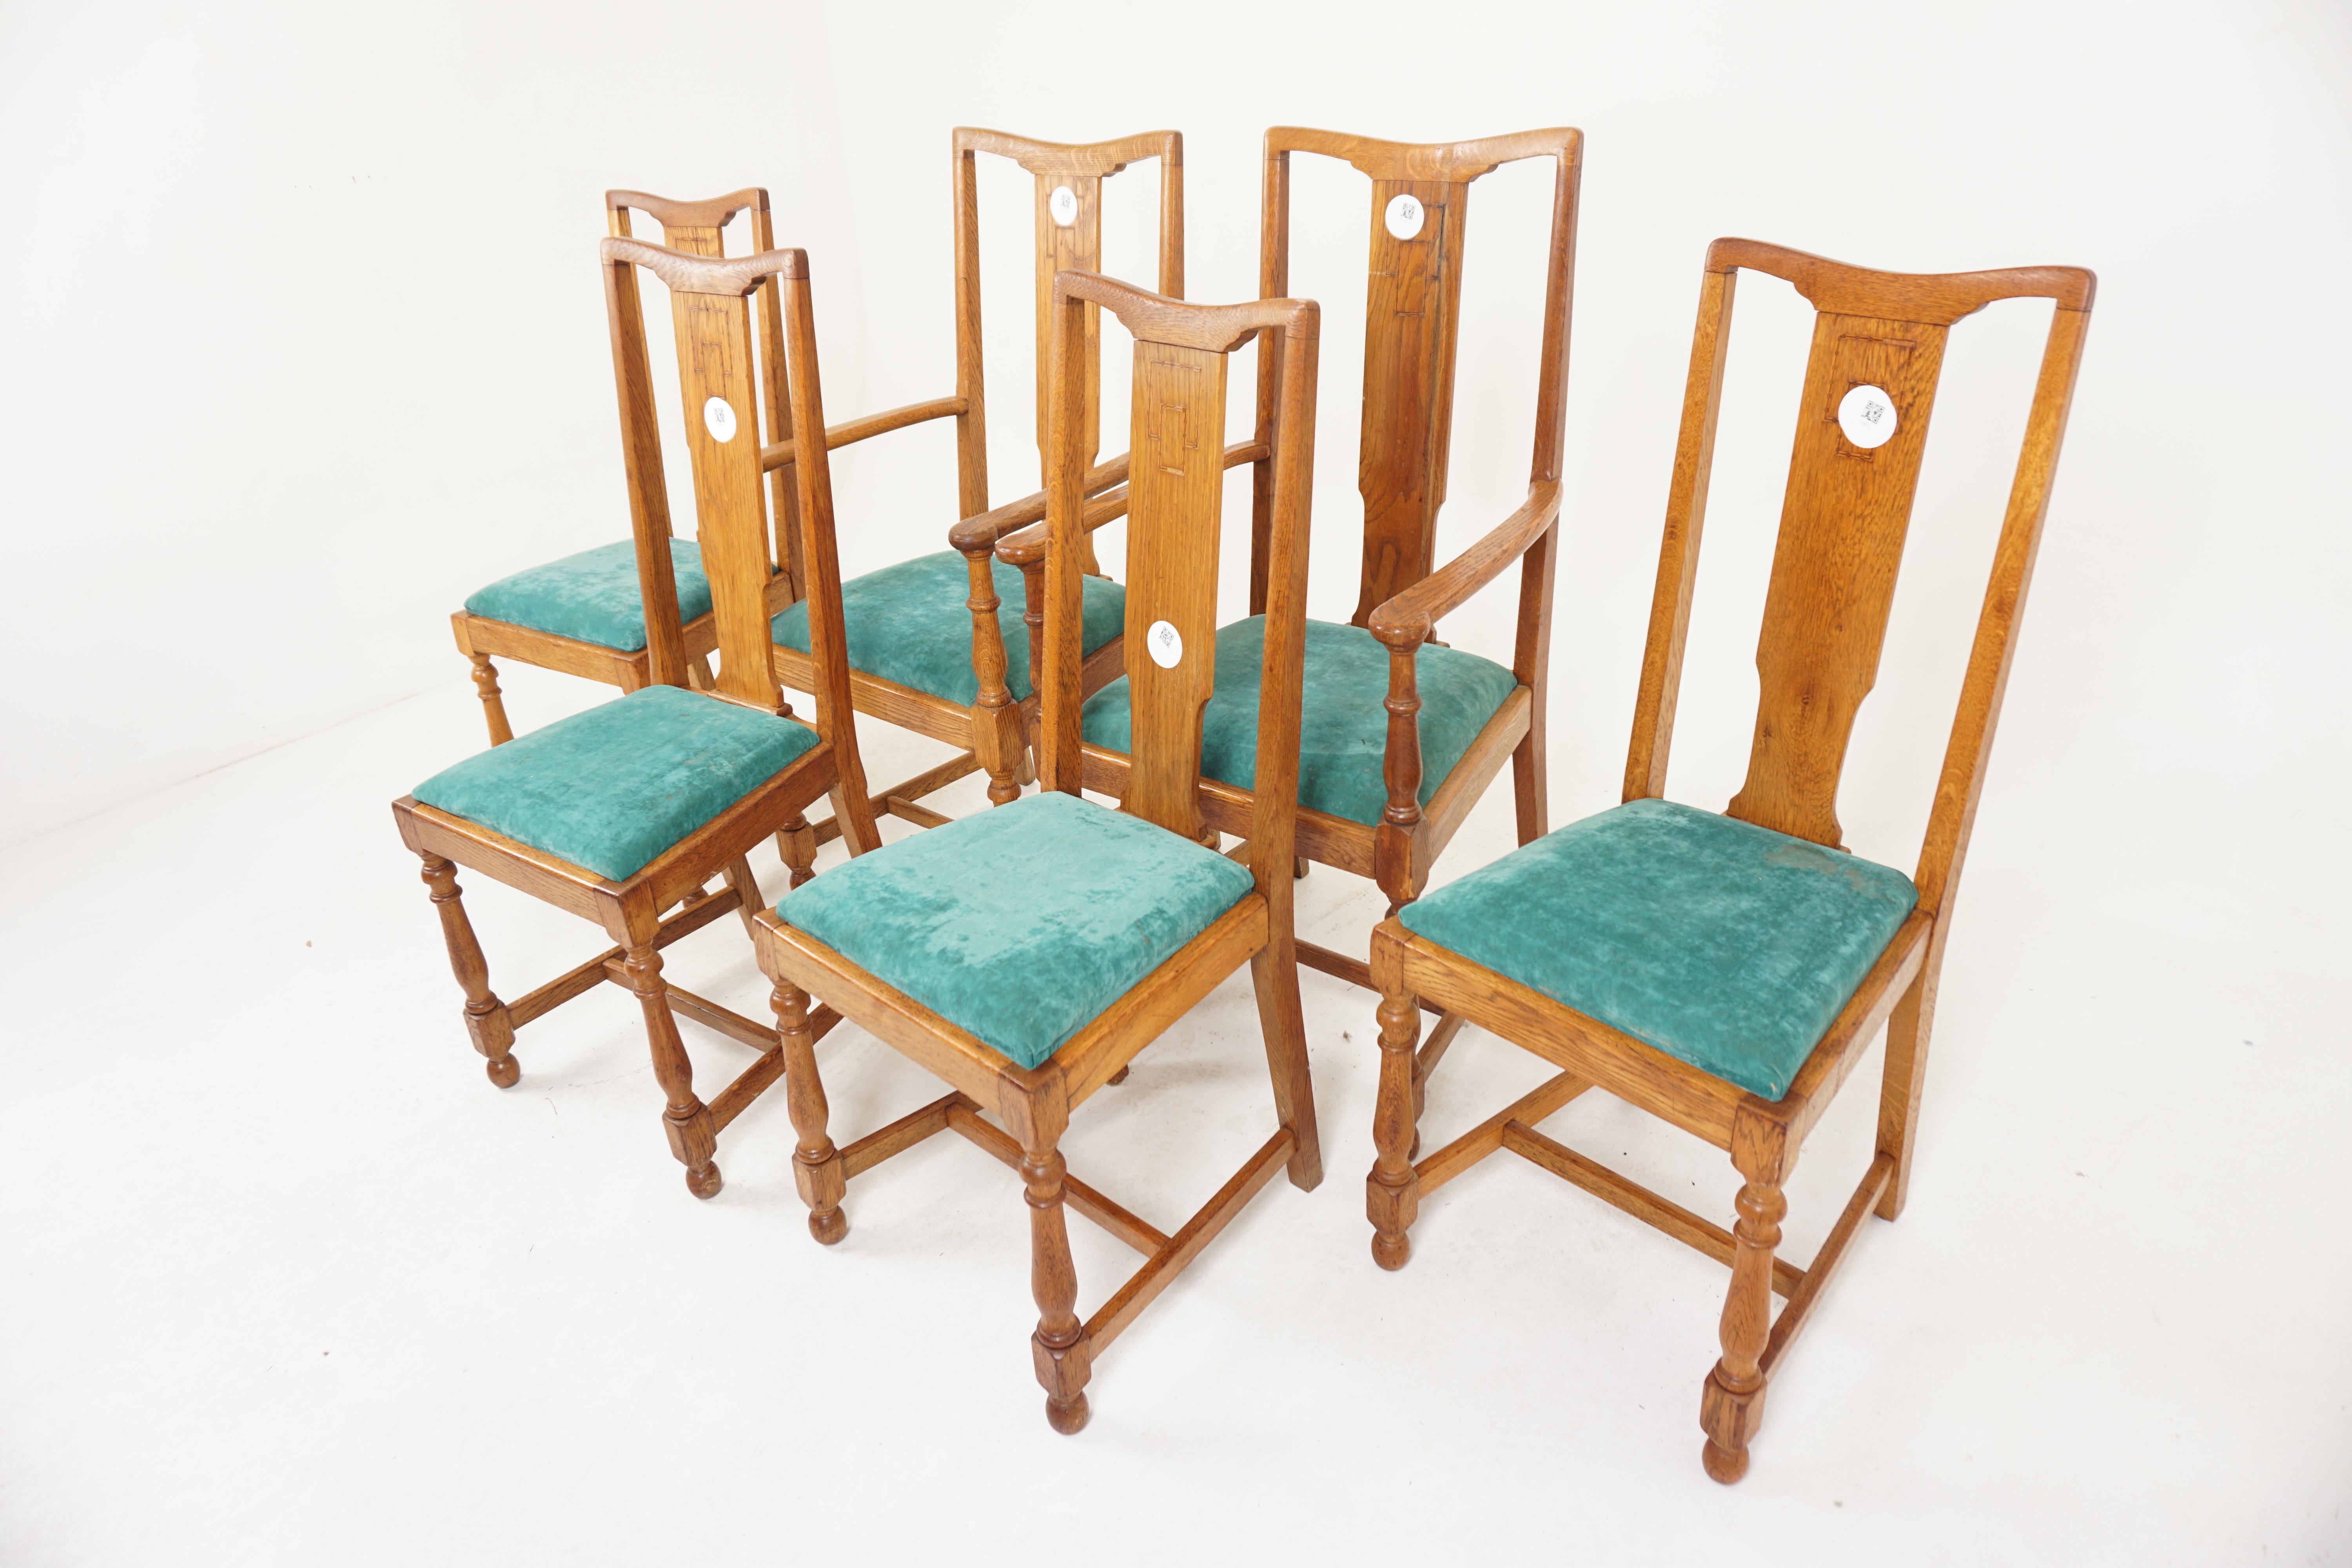 6 Inlaid oak Arts and Crafts dining chairs (4 + 2), Scotland 1910, H883

Scotland 1910
Solid oak and veneers
Original finish
High back with inlay to the back splats
With a shaped top rails and chambered uprights
With an upholstered lift out